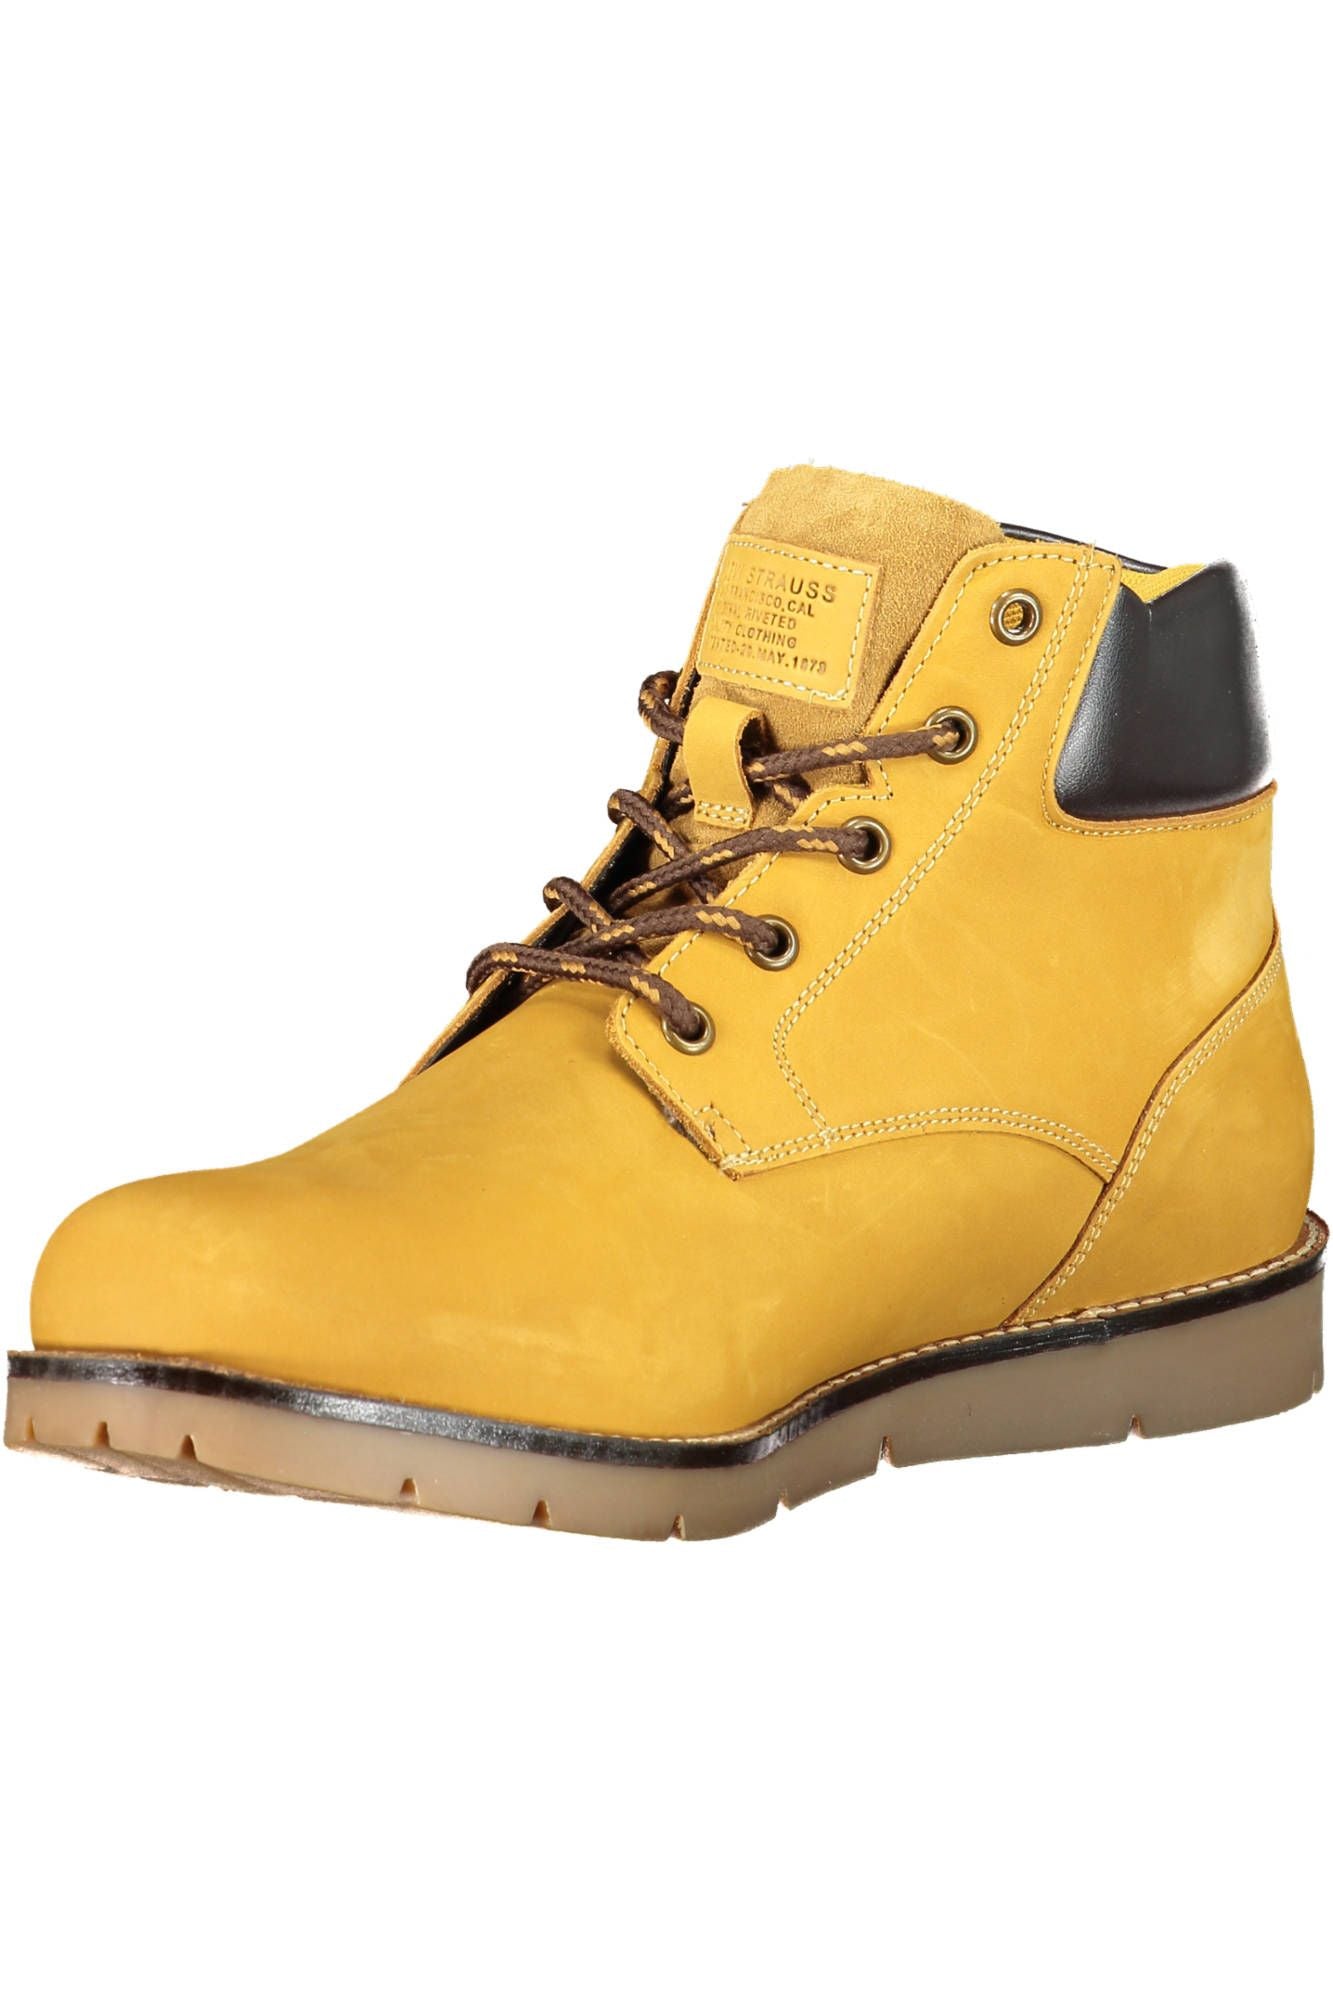 Sunset Yellow Ankle Boots with Lace-Up Detail